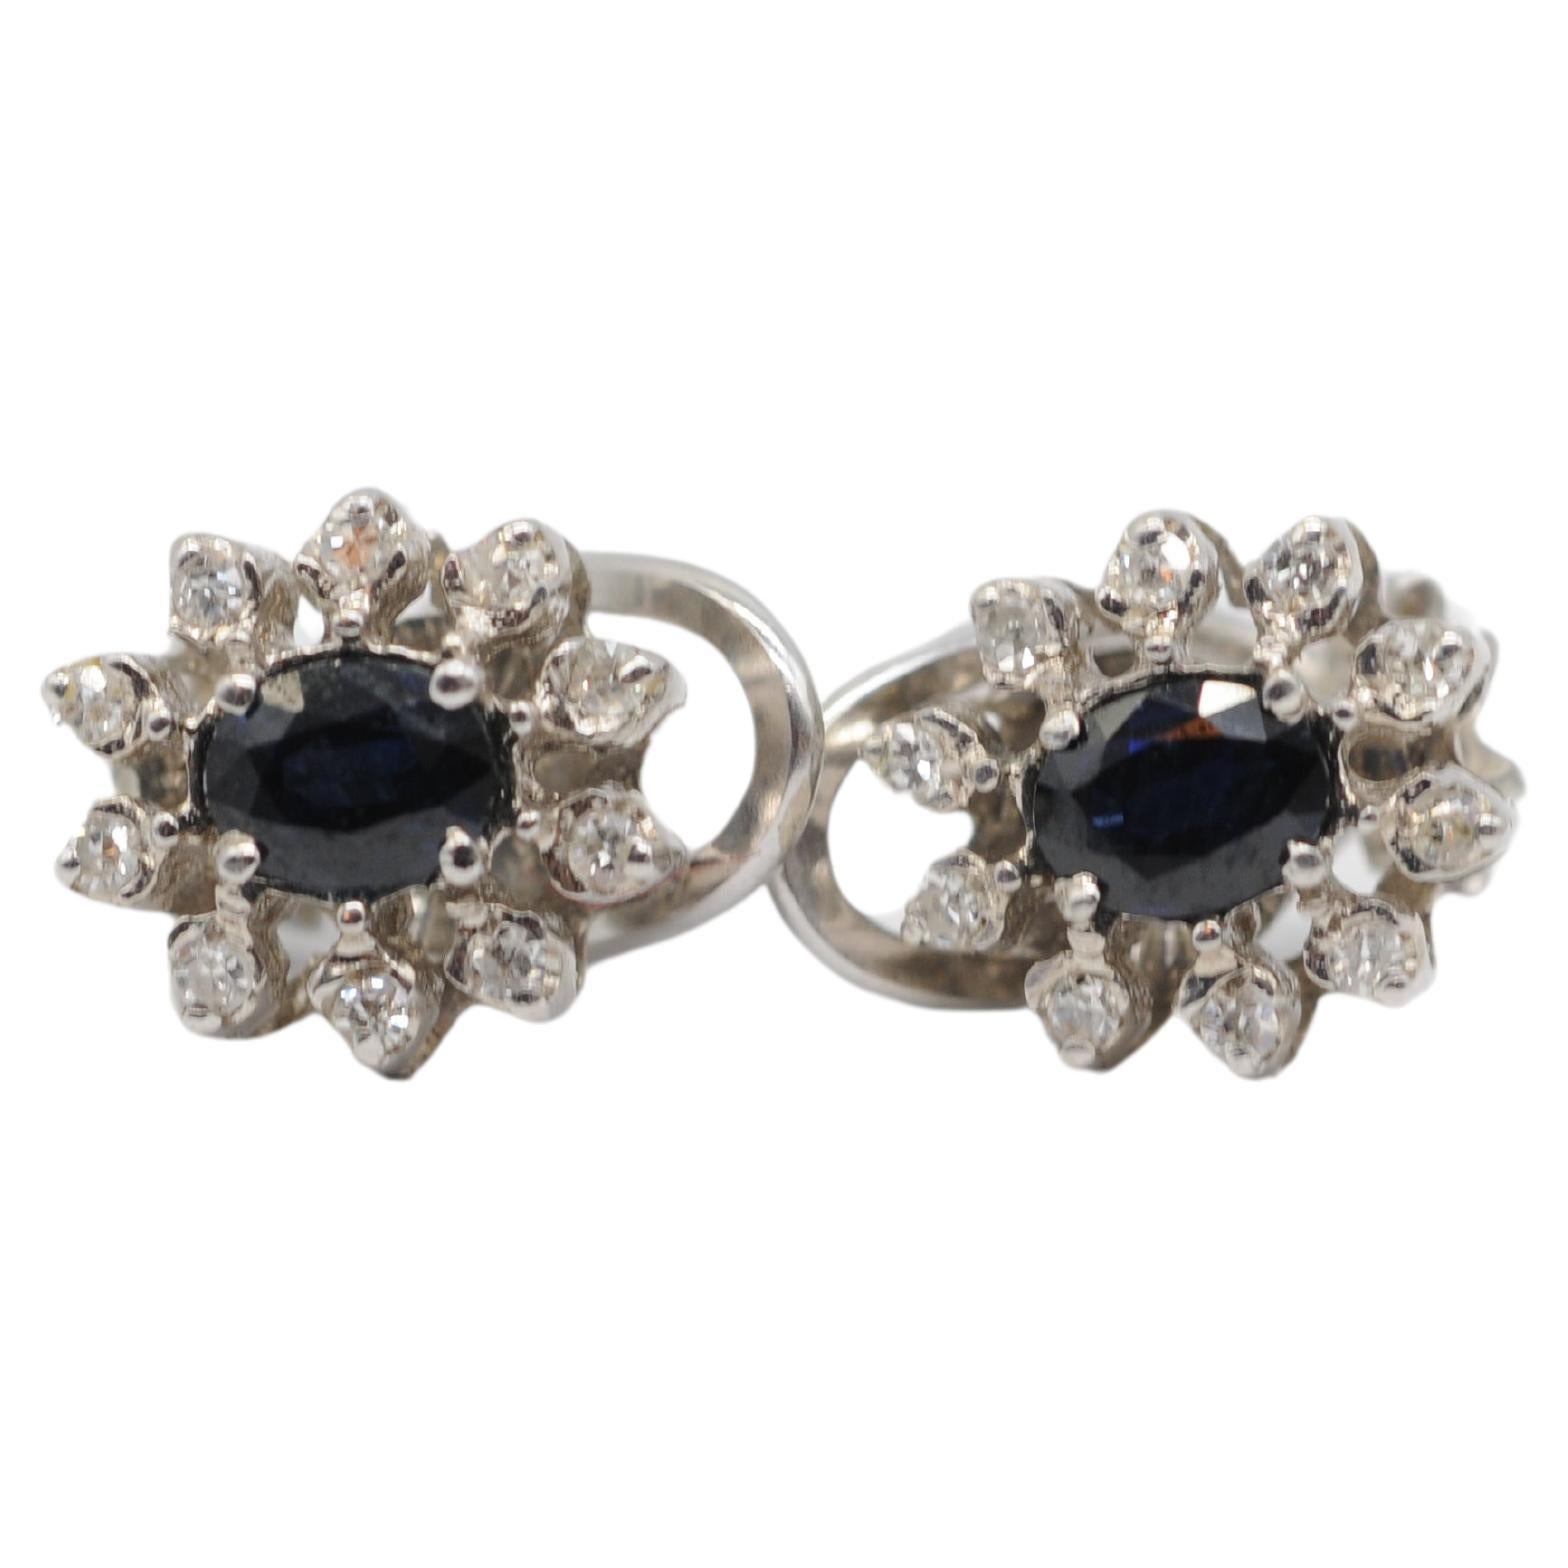 good earrings with sapphires and diamonds in 14k gold